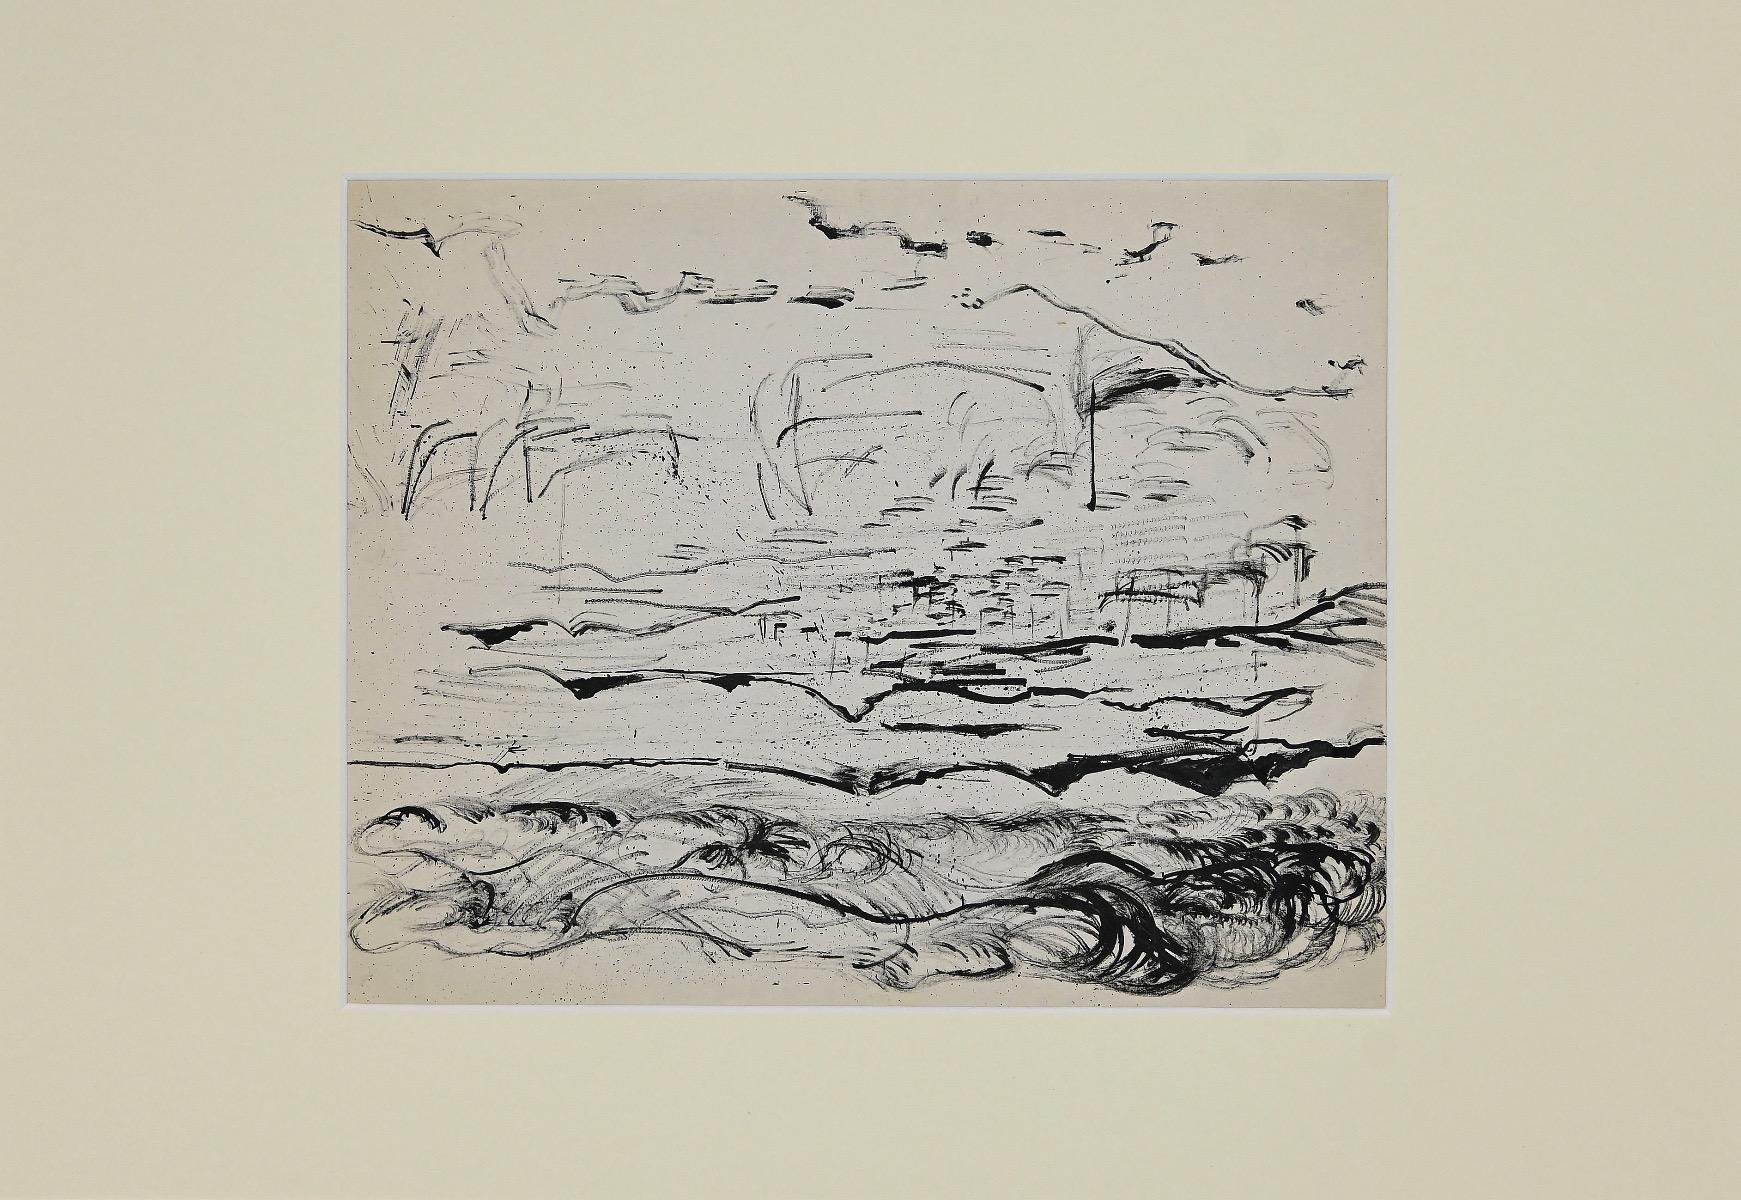 Landscape is an original pencil and pen drawing on ivory-colorated cardboard by Herta Hausmann (1916-?).

In very good condition.

Not signed. Stamp of the atelier on the back.

Image Dimensions: 23 x 29 cm